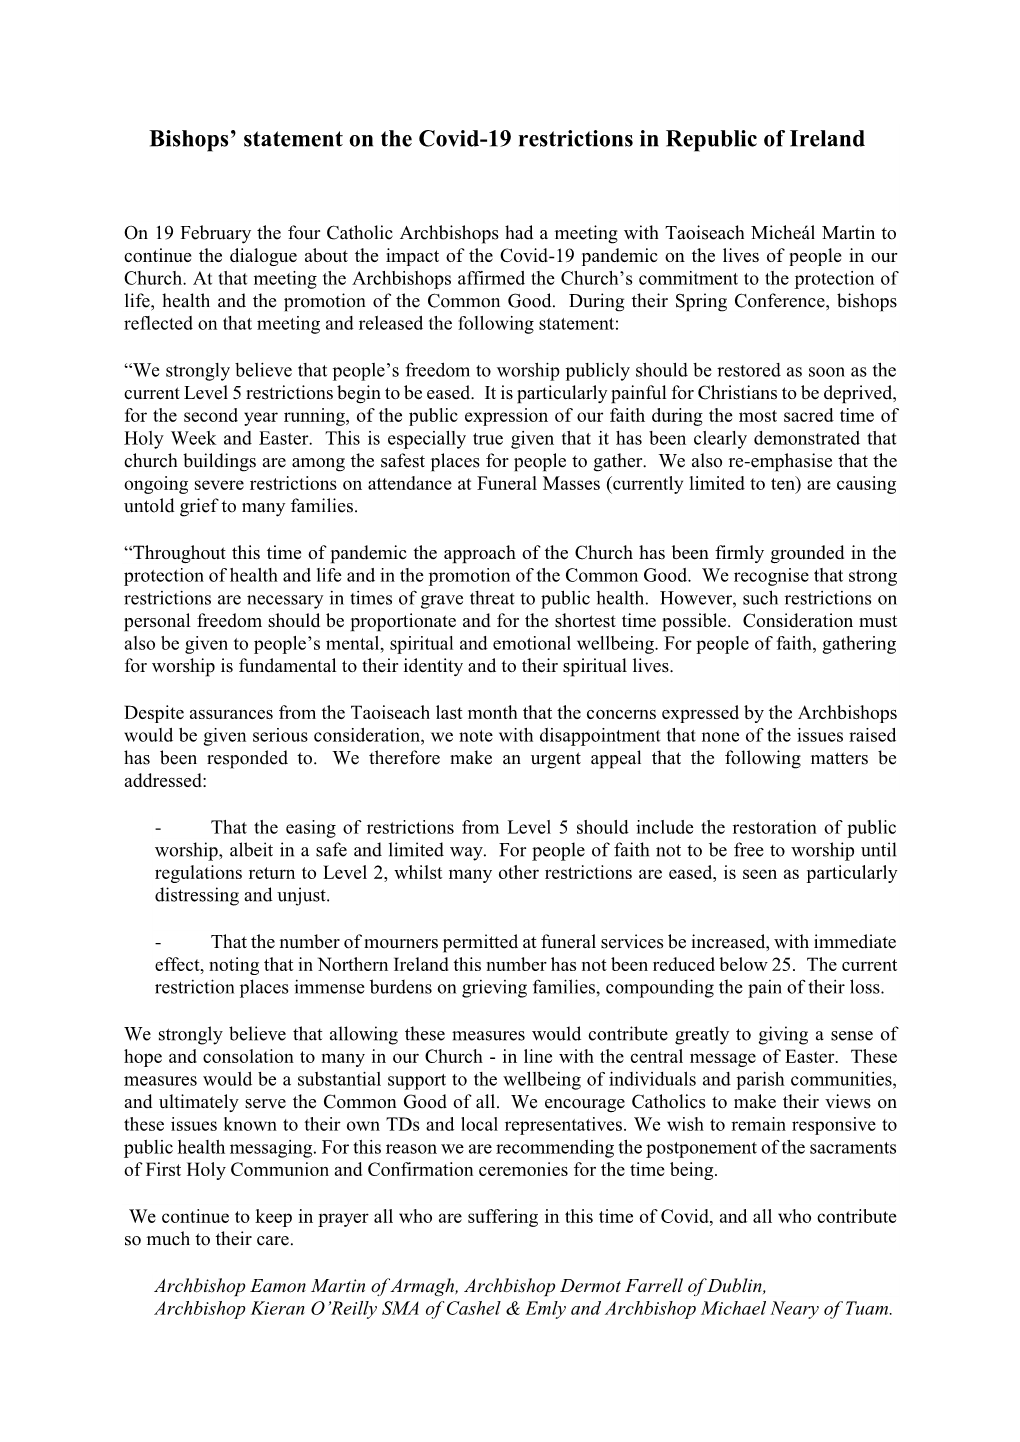 Bishops' Statement on the Covid-19 Restrictions in Republic of Ireland